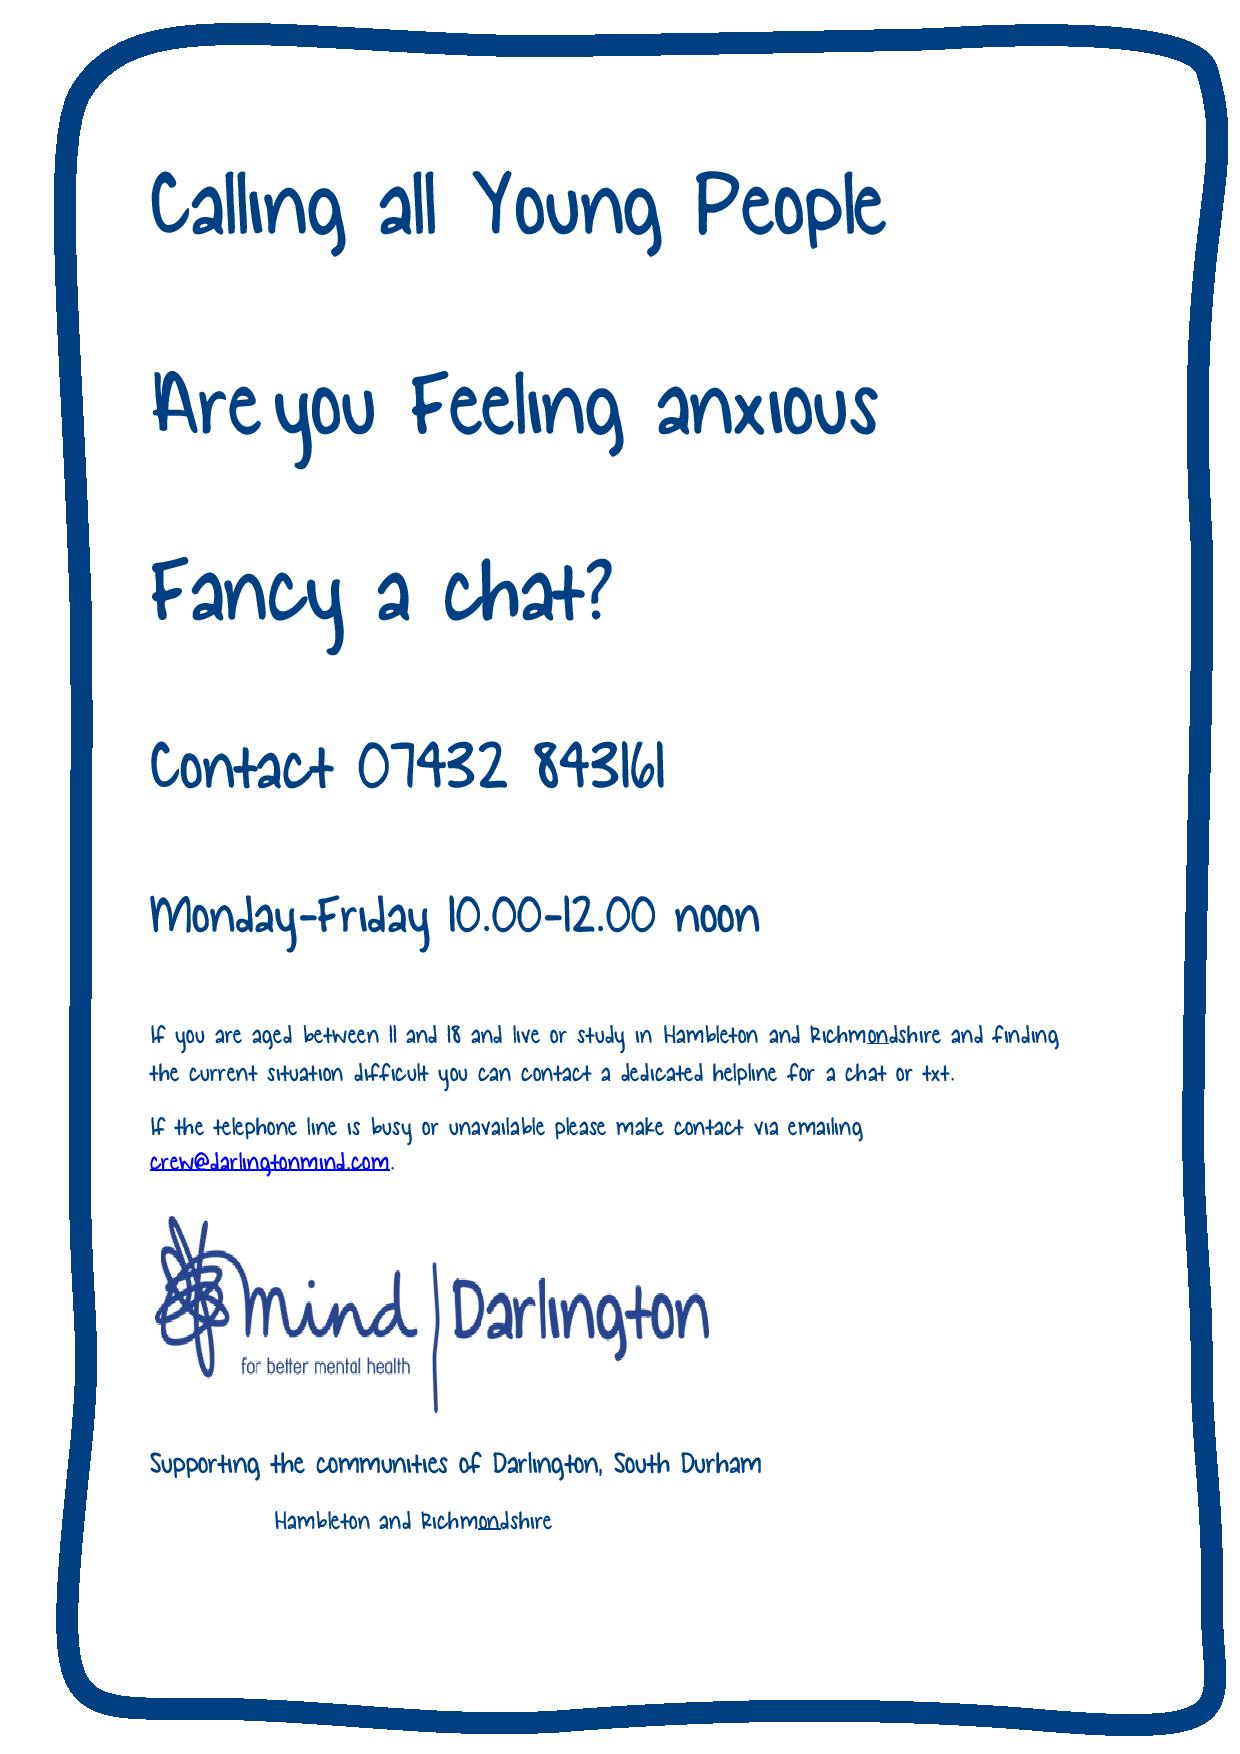 Mind Darlington - Support for young people: